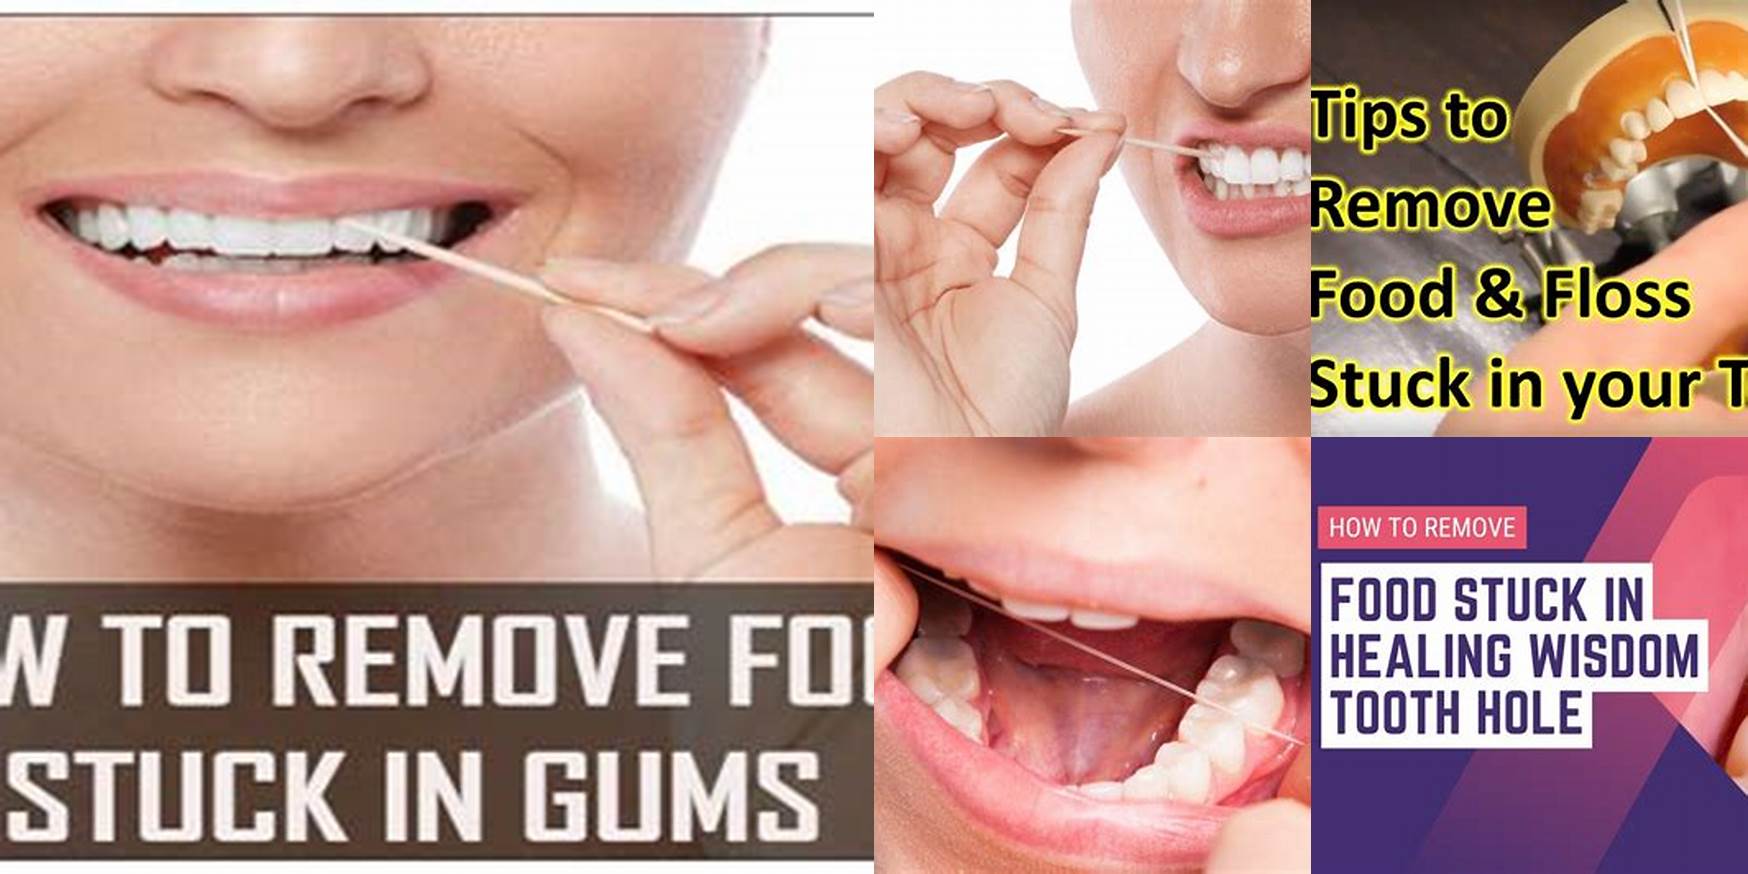 How To Remove Food Stuck Under Gums